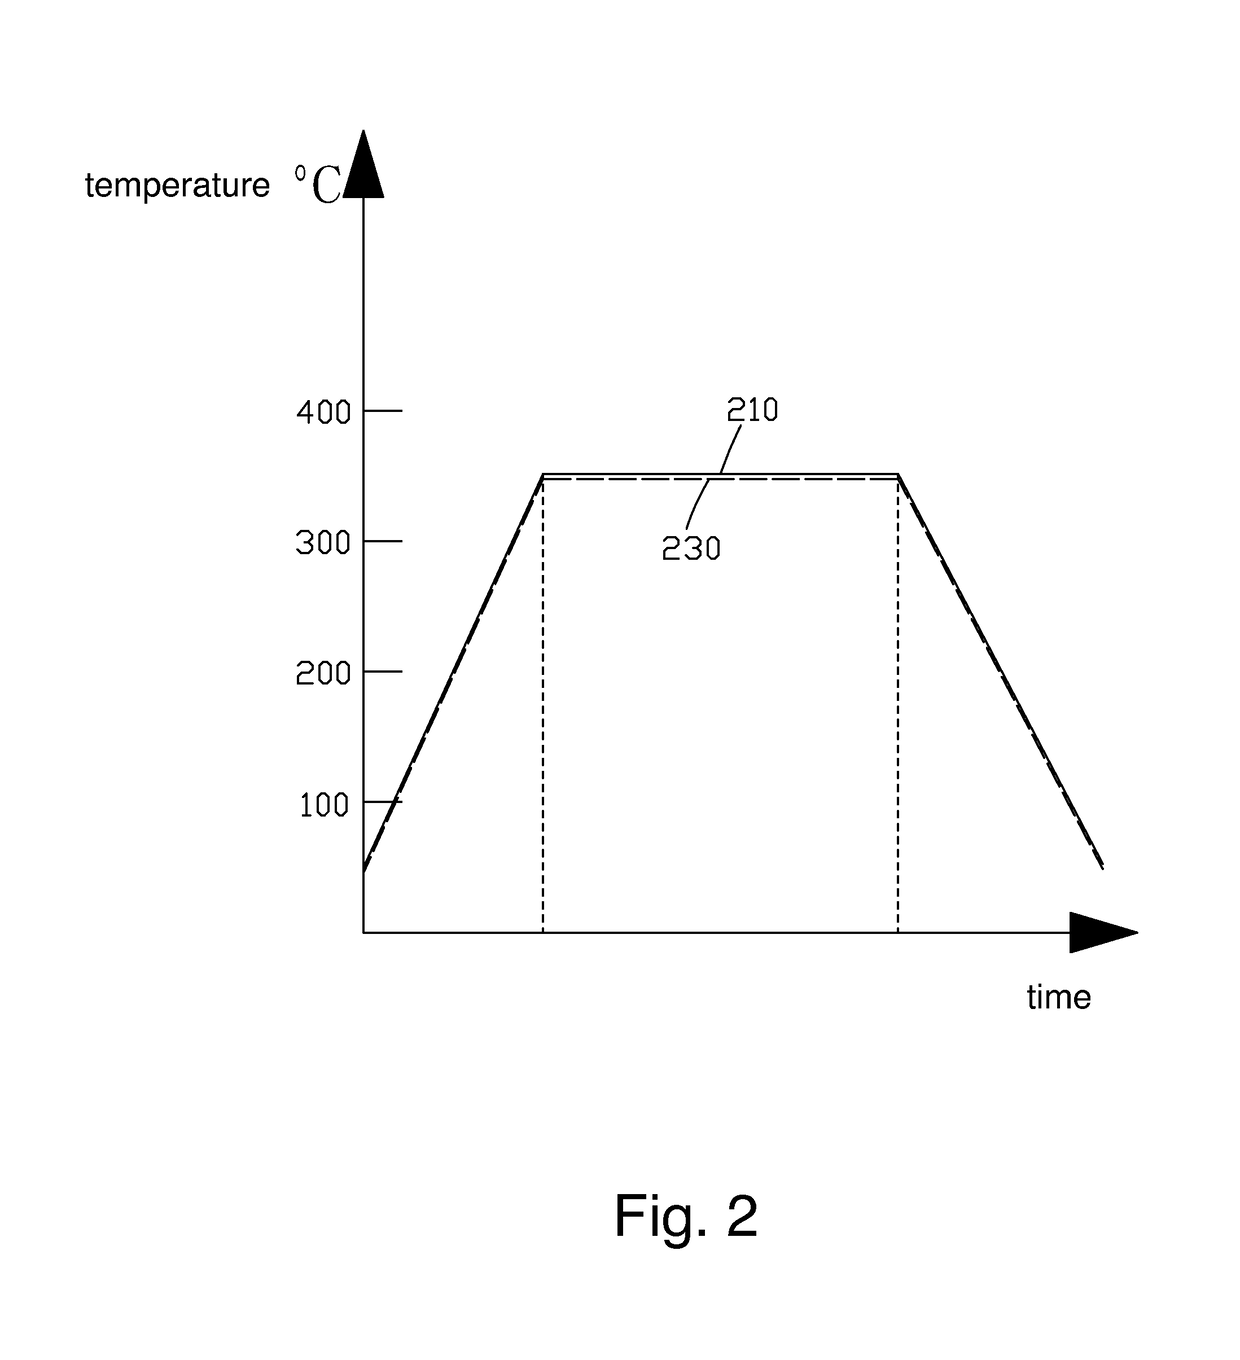 Heating device for evaporation of OLED material